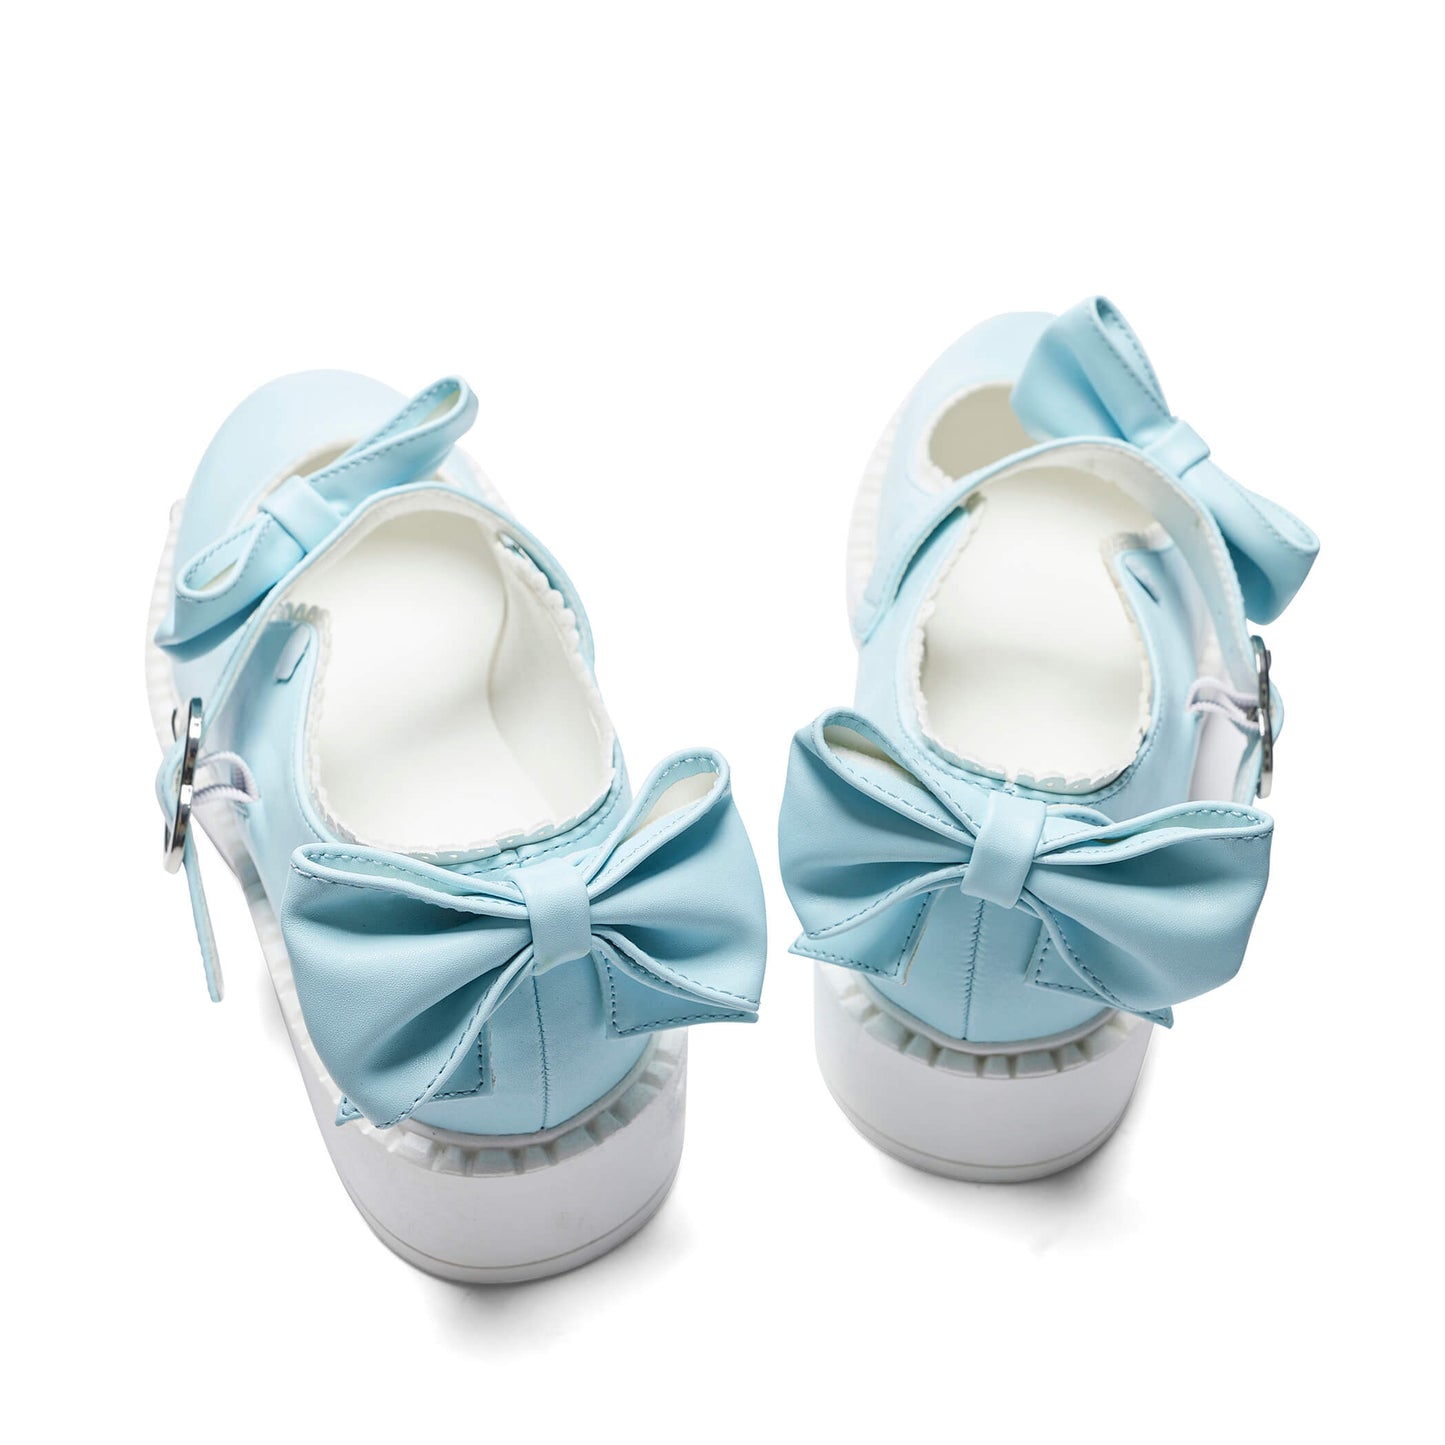 Fairy Lace Doily Mary Janes - Baby Blue - Mary Janes - KOI Footwear - Blue - Back Detail